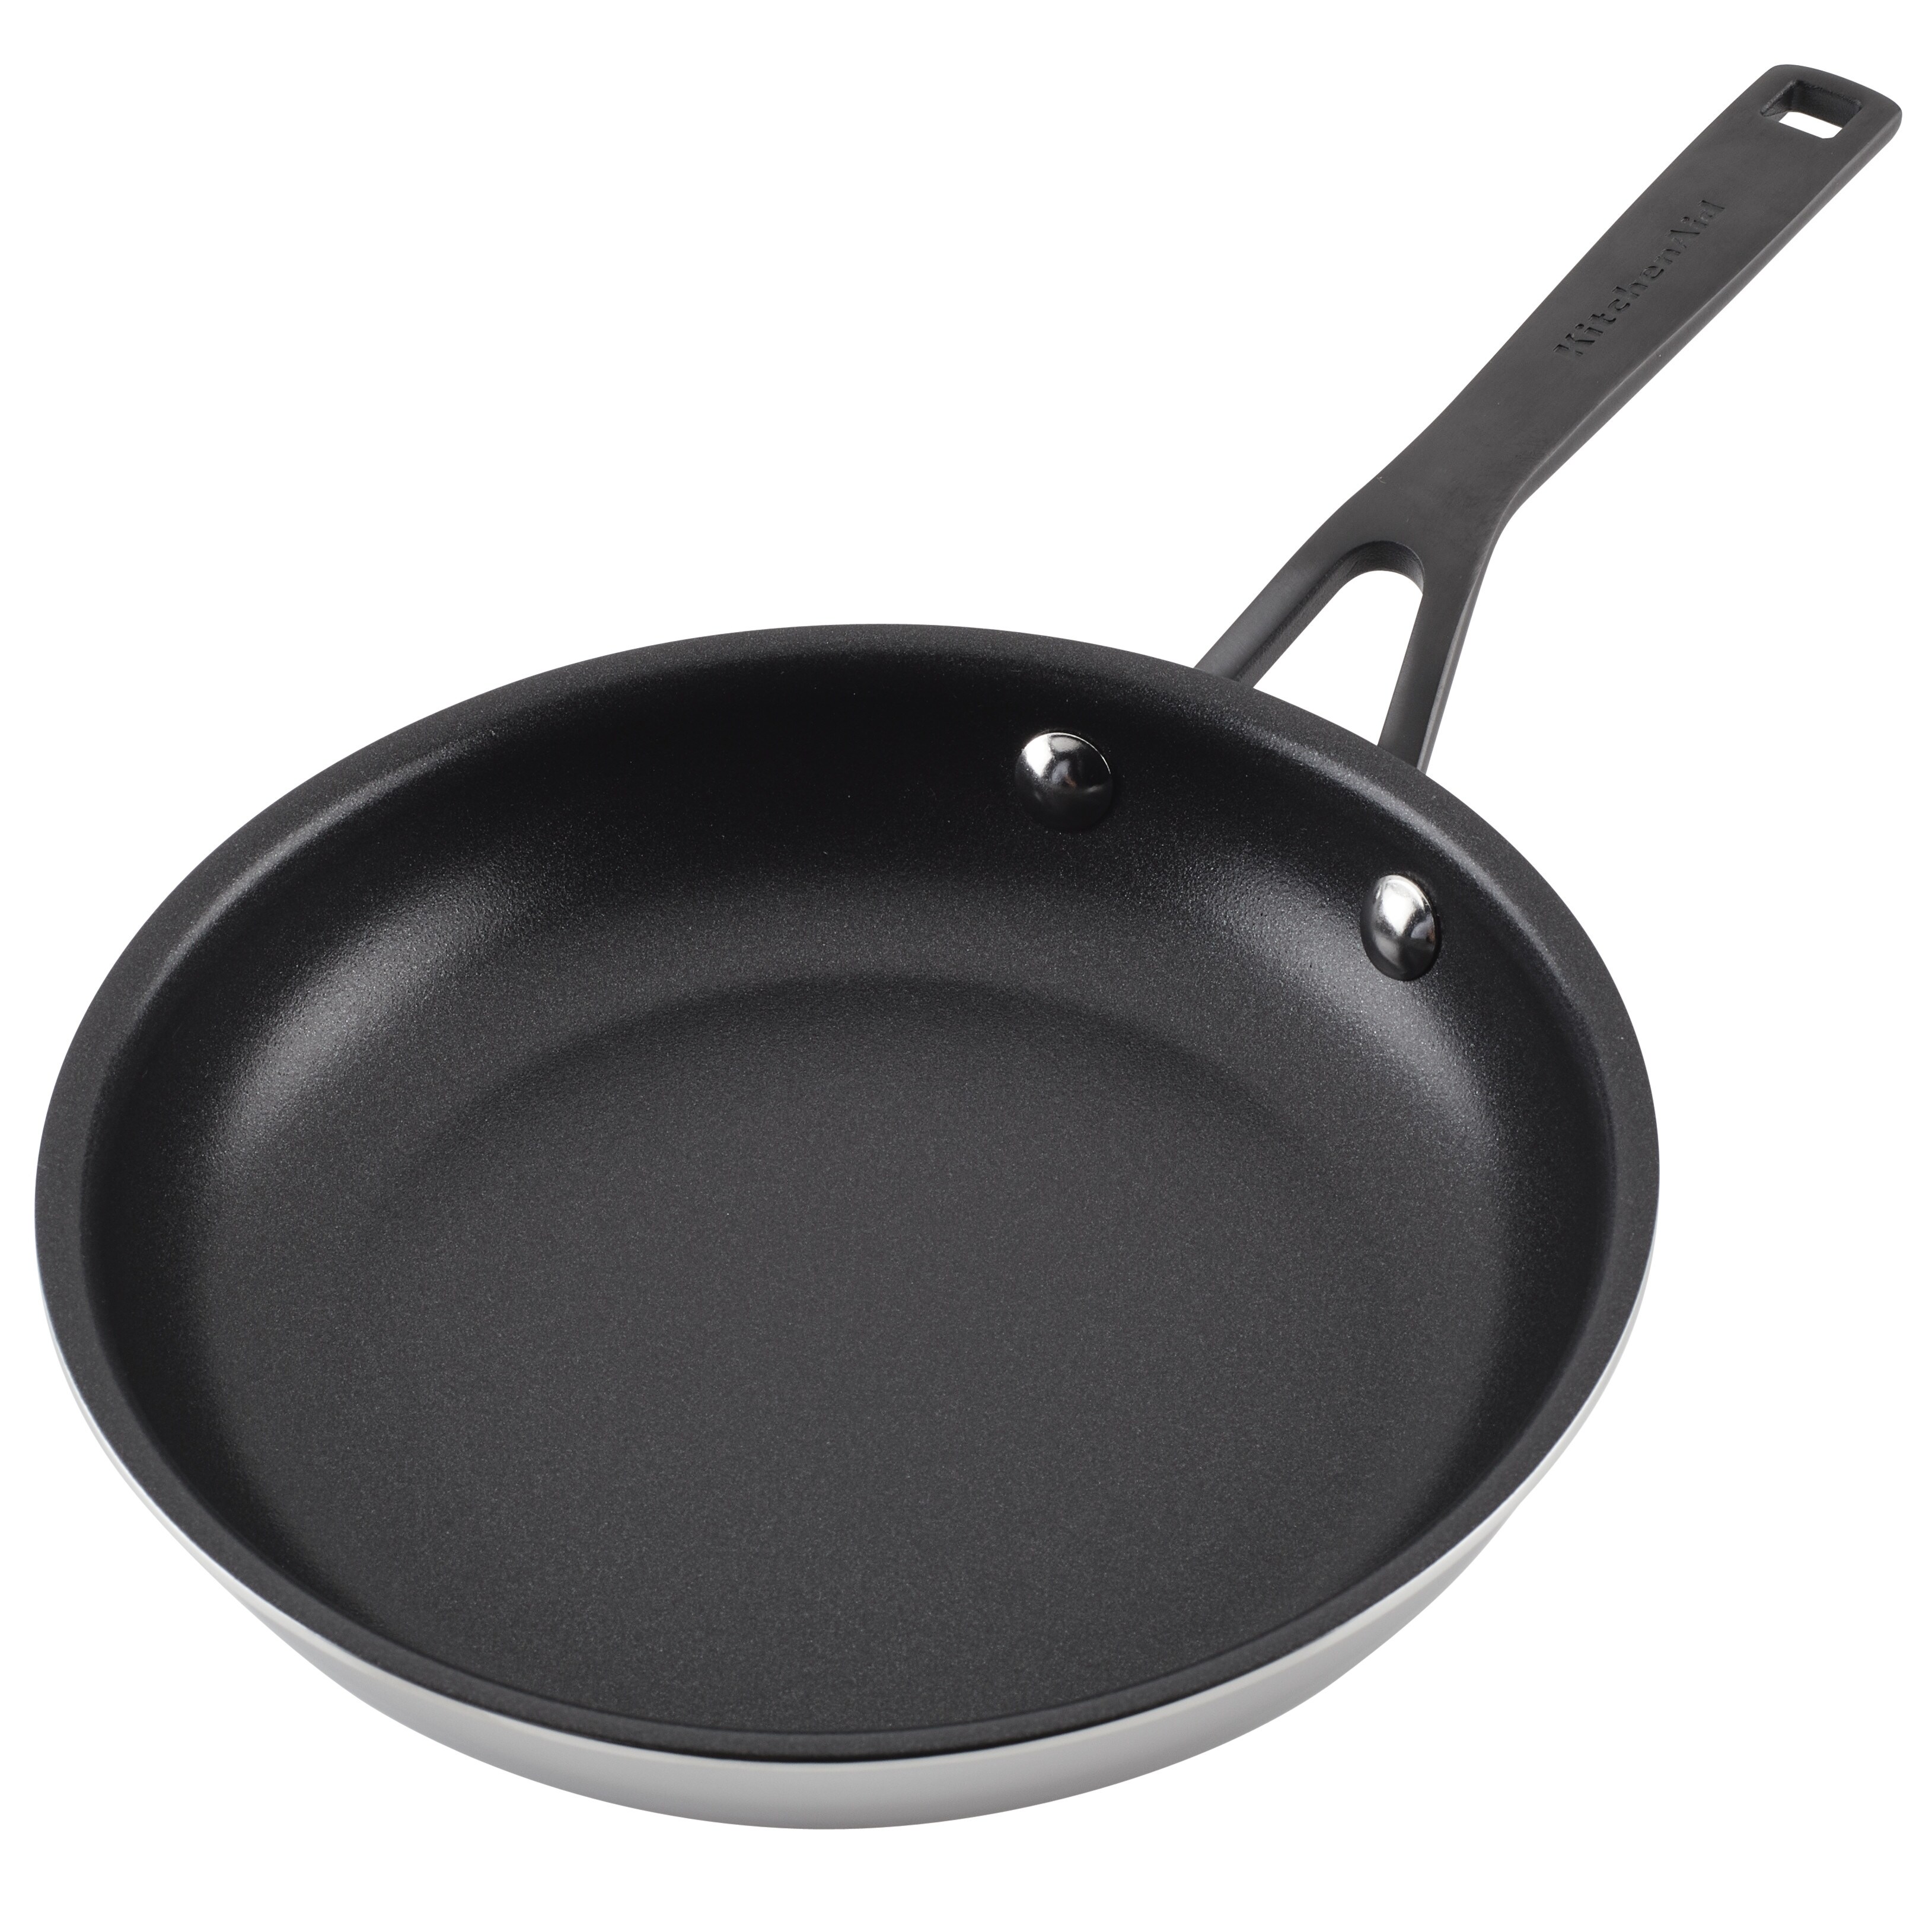 KitchenAid 5-Ply Clad Stainless Steel and Nonstick Frying Pan Set, 2pc -  Bed Bath & Beyond - 34310123